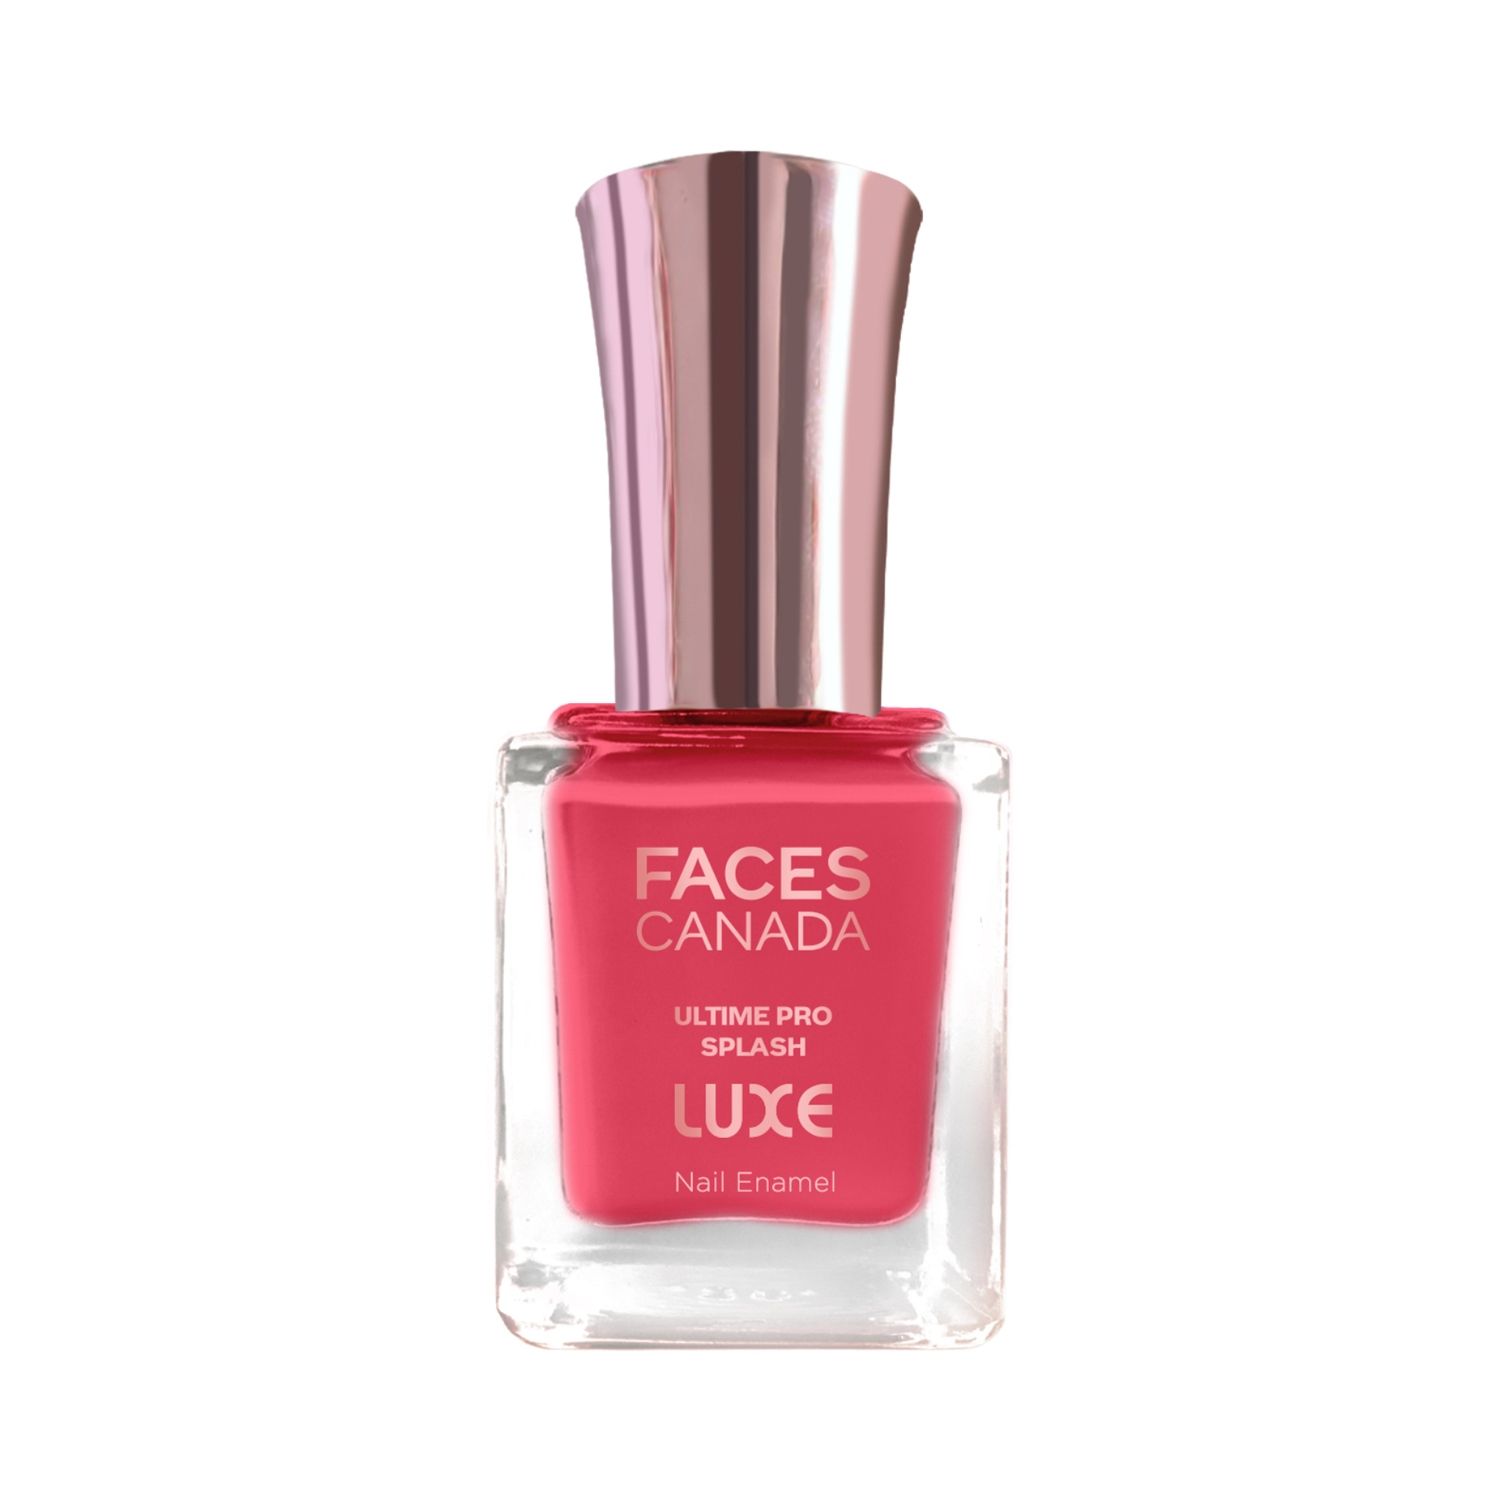 Faces Canada | Faces Canada Ultime Pro Splash Luxe Nail Enamel - L24 Coral Reef (12ml)